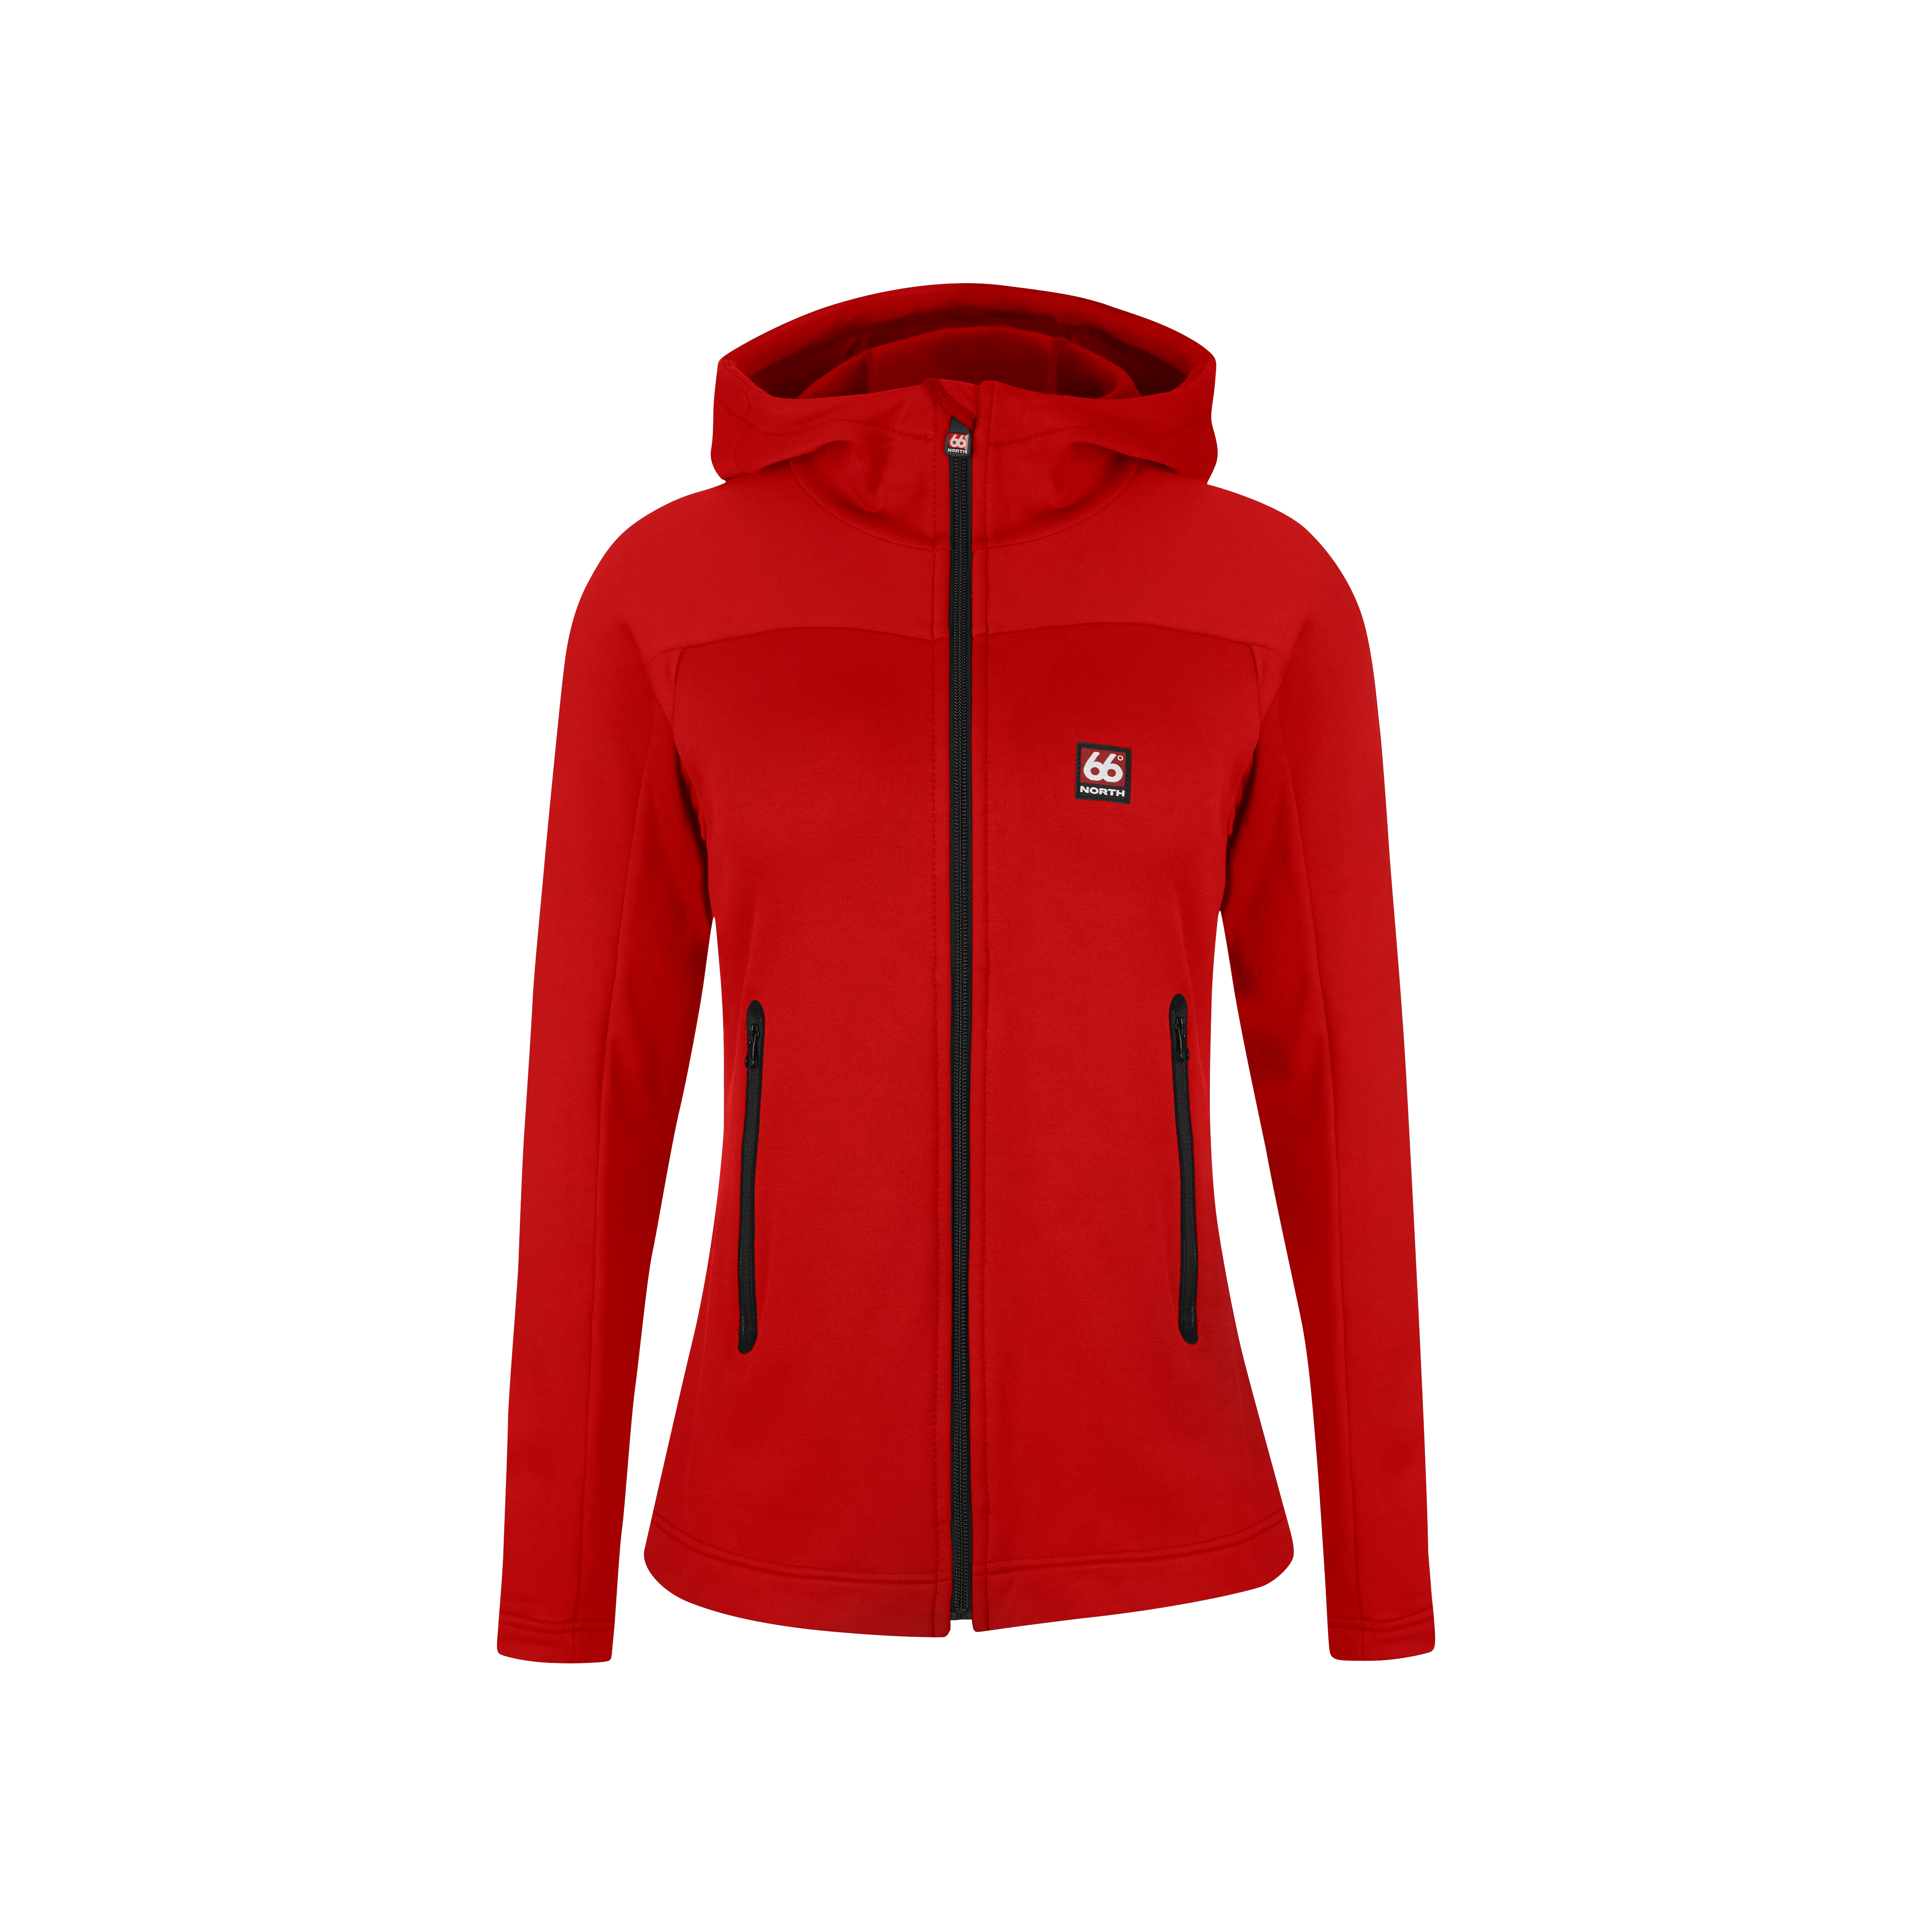 66 North Womens Snfell TopsandVests - Red - L